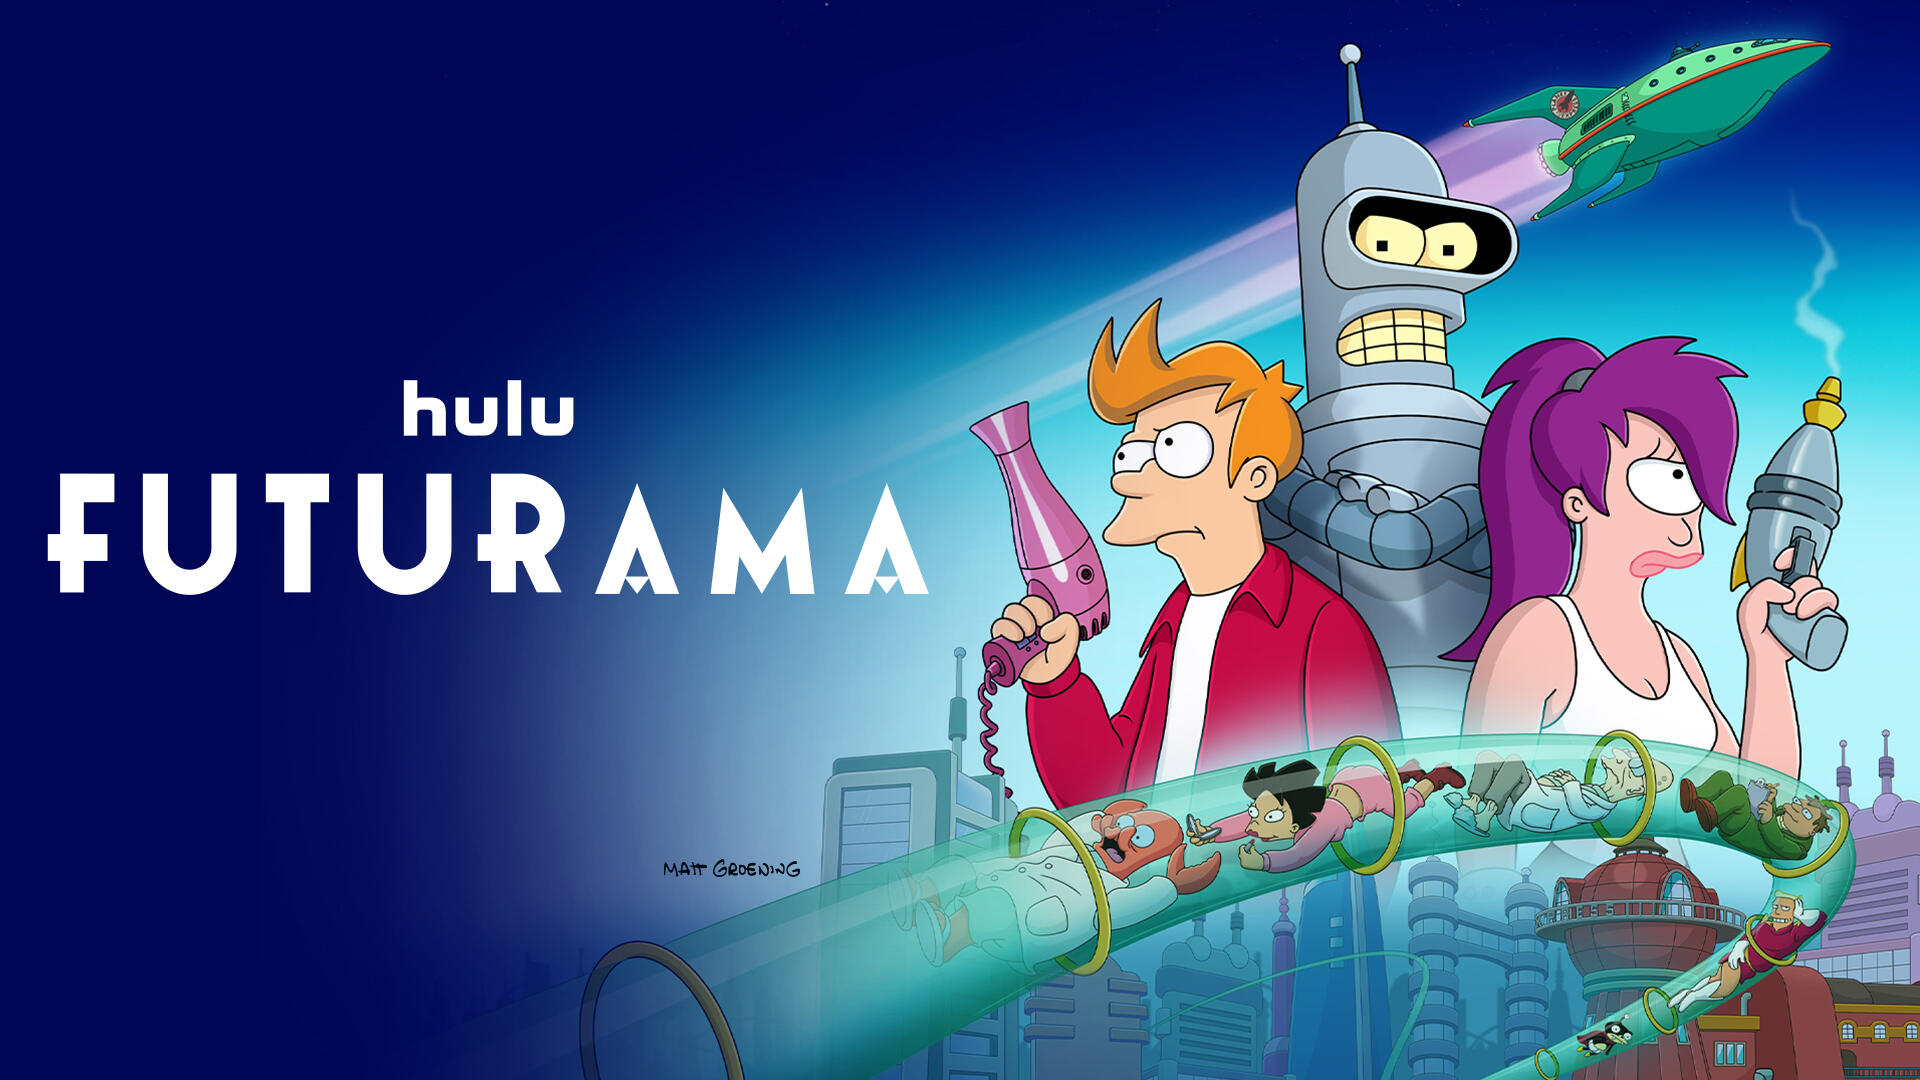 Futurama -- Season 11 -- After a brief ten-year hiatus, Futurama has crawled triumphantly from the cryogenic tube, its full original cast and satirical spirit intact. The ten all-new episodes of season eleven have something for everyone. New viewers will be able to pick up the series from here, while long-time fans will recognize payoffs to decades-long mysteries – including developments in the epic love story of Fry and Leela, the mysterious contents of Nibbler's litter box, the secret history of evil Robot Santa, and the whereabouts of Kif and Amy's tadpoles. Meanwhile there's a whole new pandemic in town as the crew explores the future of vaccines, bitcoin, cancel culture, and streaming TV. (Courtesy of Hulu)